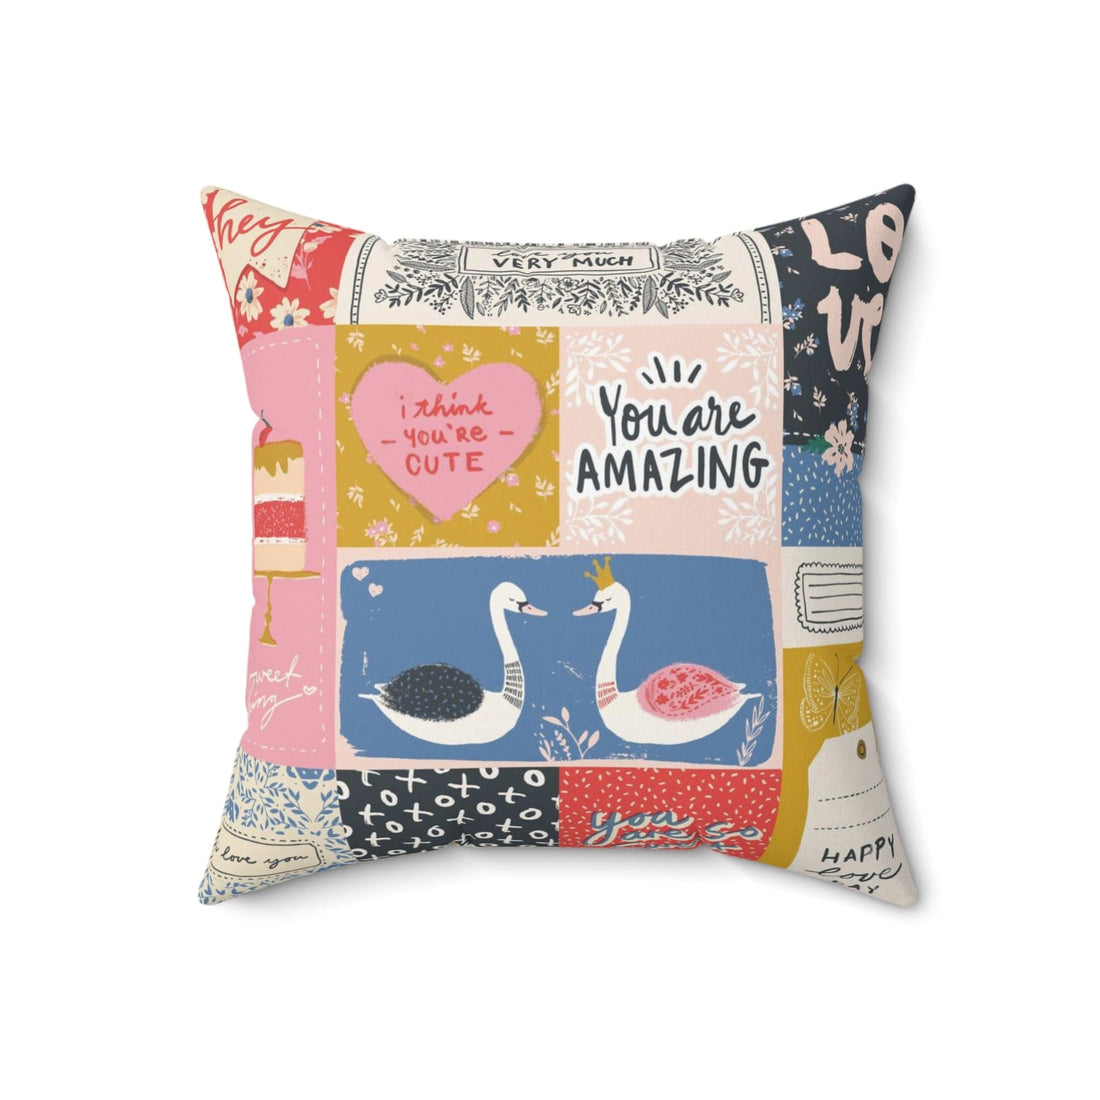 Kate McEnroe New York Whimsical Love Patchwork Throw Pillow, Cozy Affirmation CushionThrow Pillows23411639188491453095